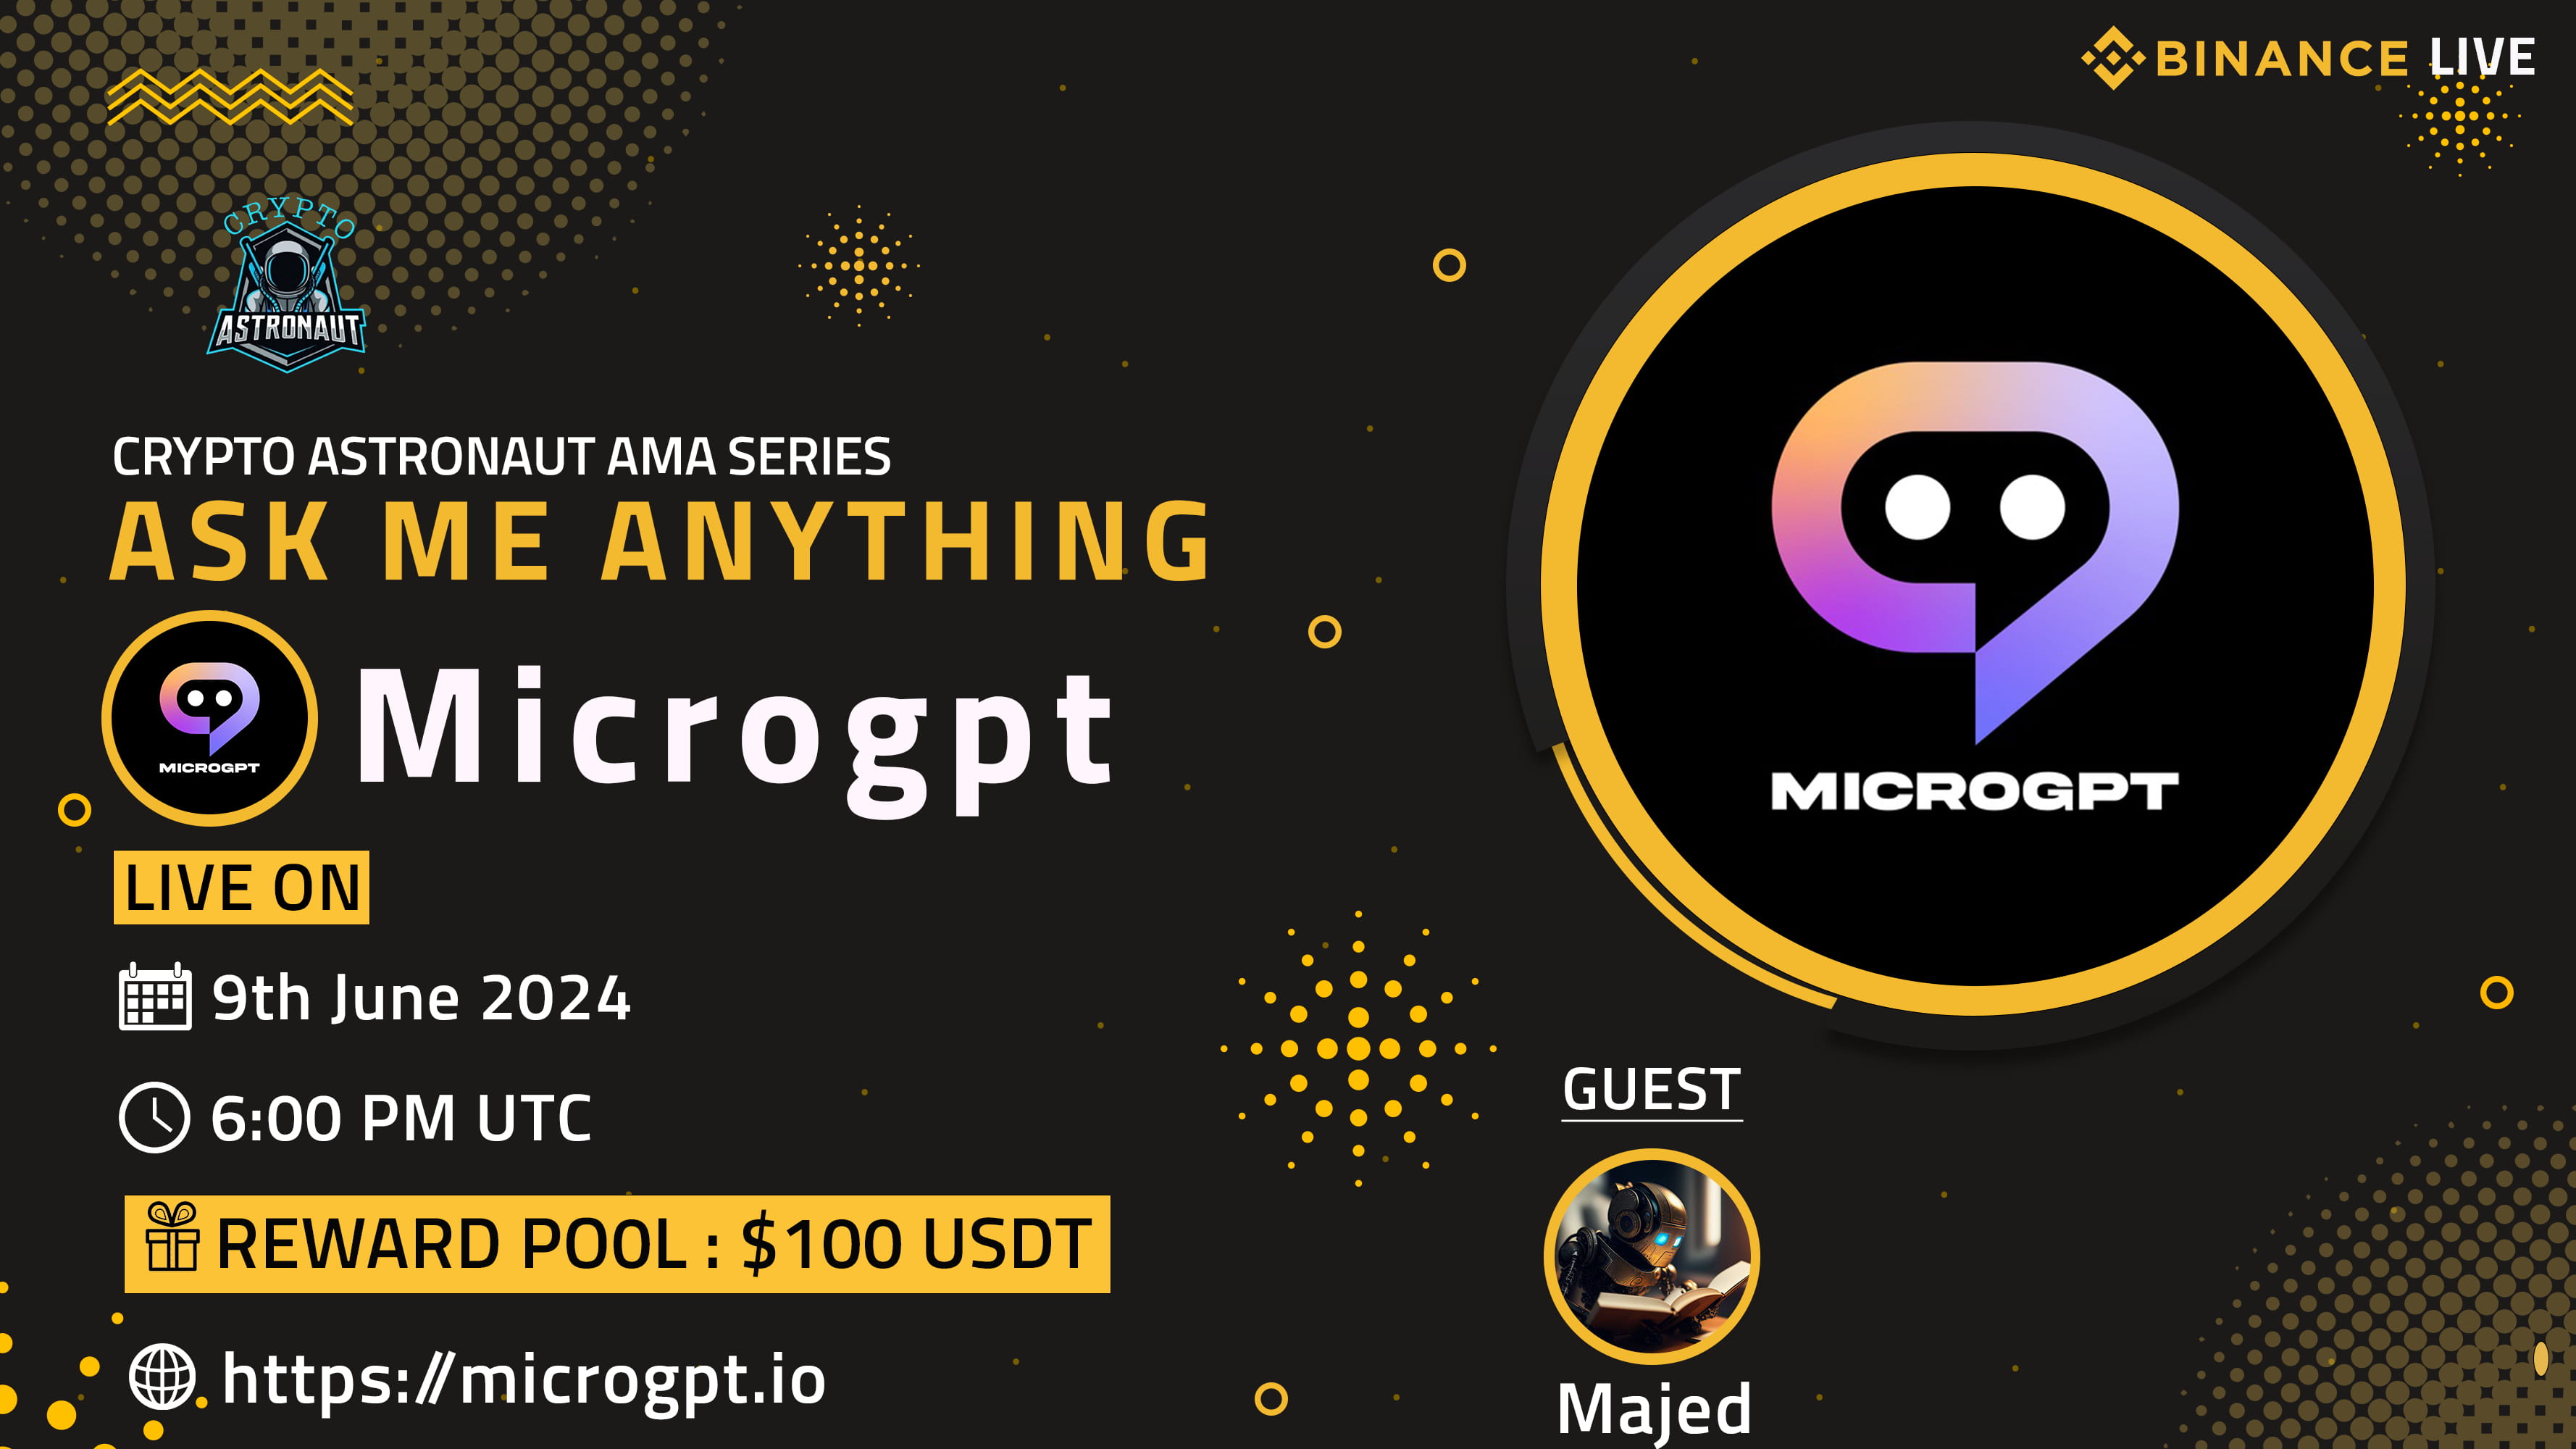 ASK ME ANYTHING - Crypto Astronaut + Microgpt